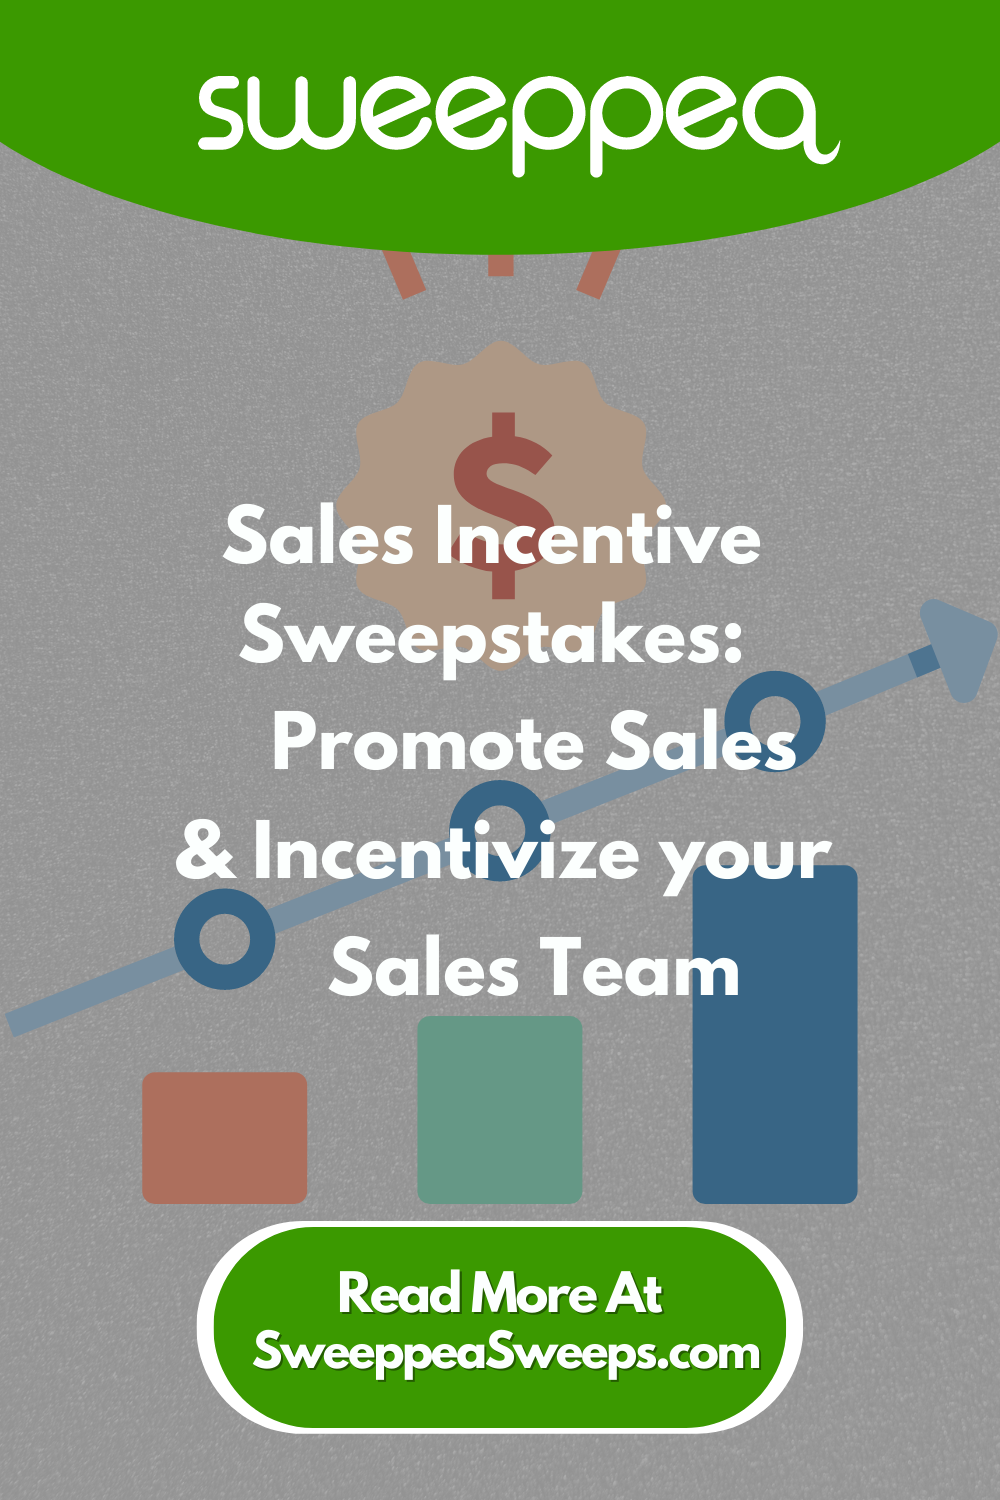 sales incentive ideas promote sales and incentivize your sales team with sweepstakes cover image